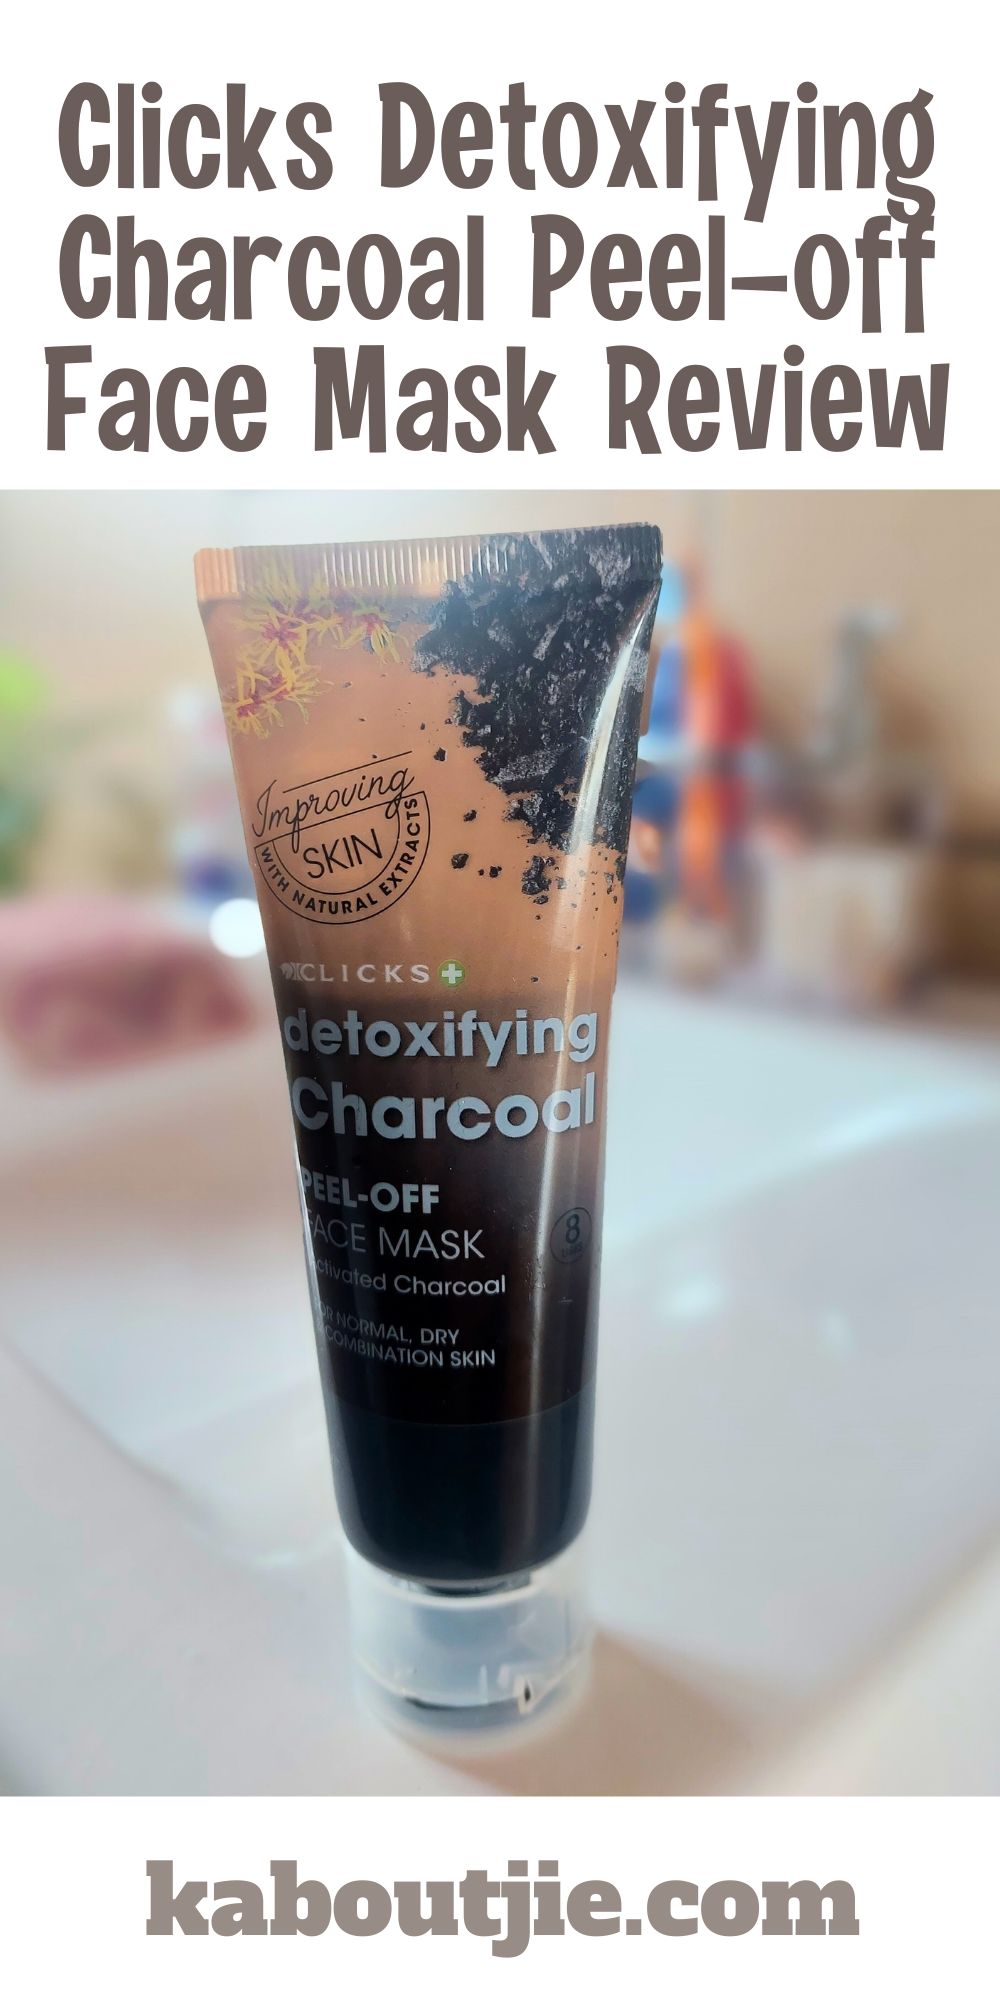 Clicks Detoxifying Charcoal Peel-off Face Mask Review